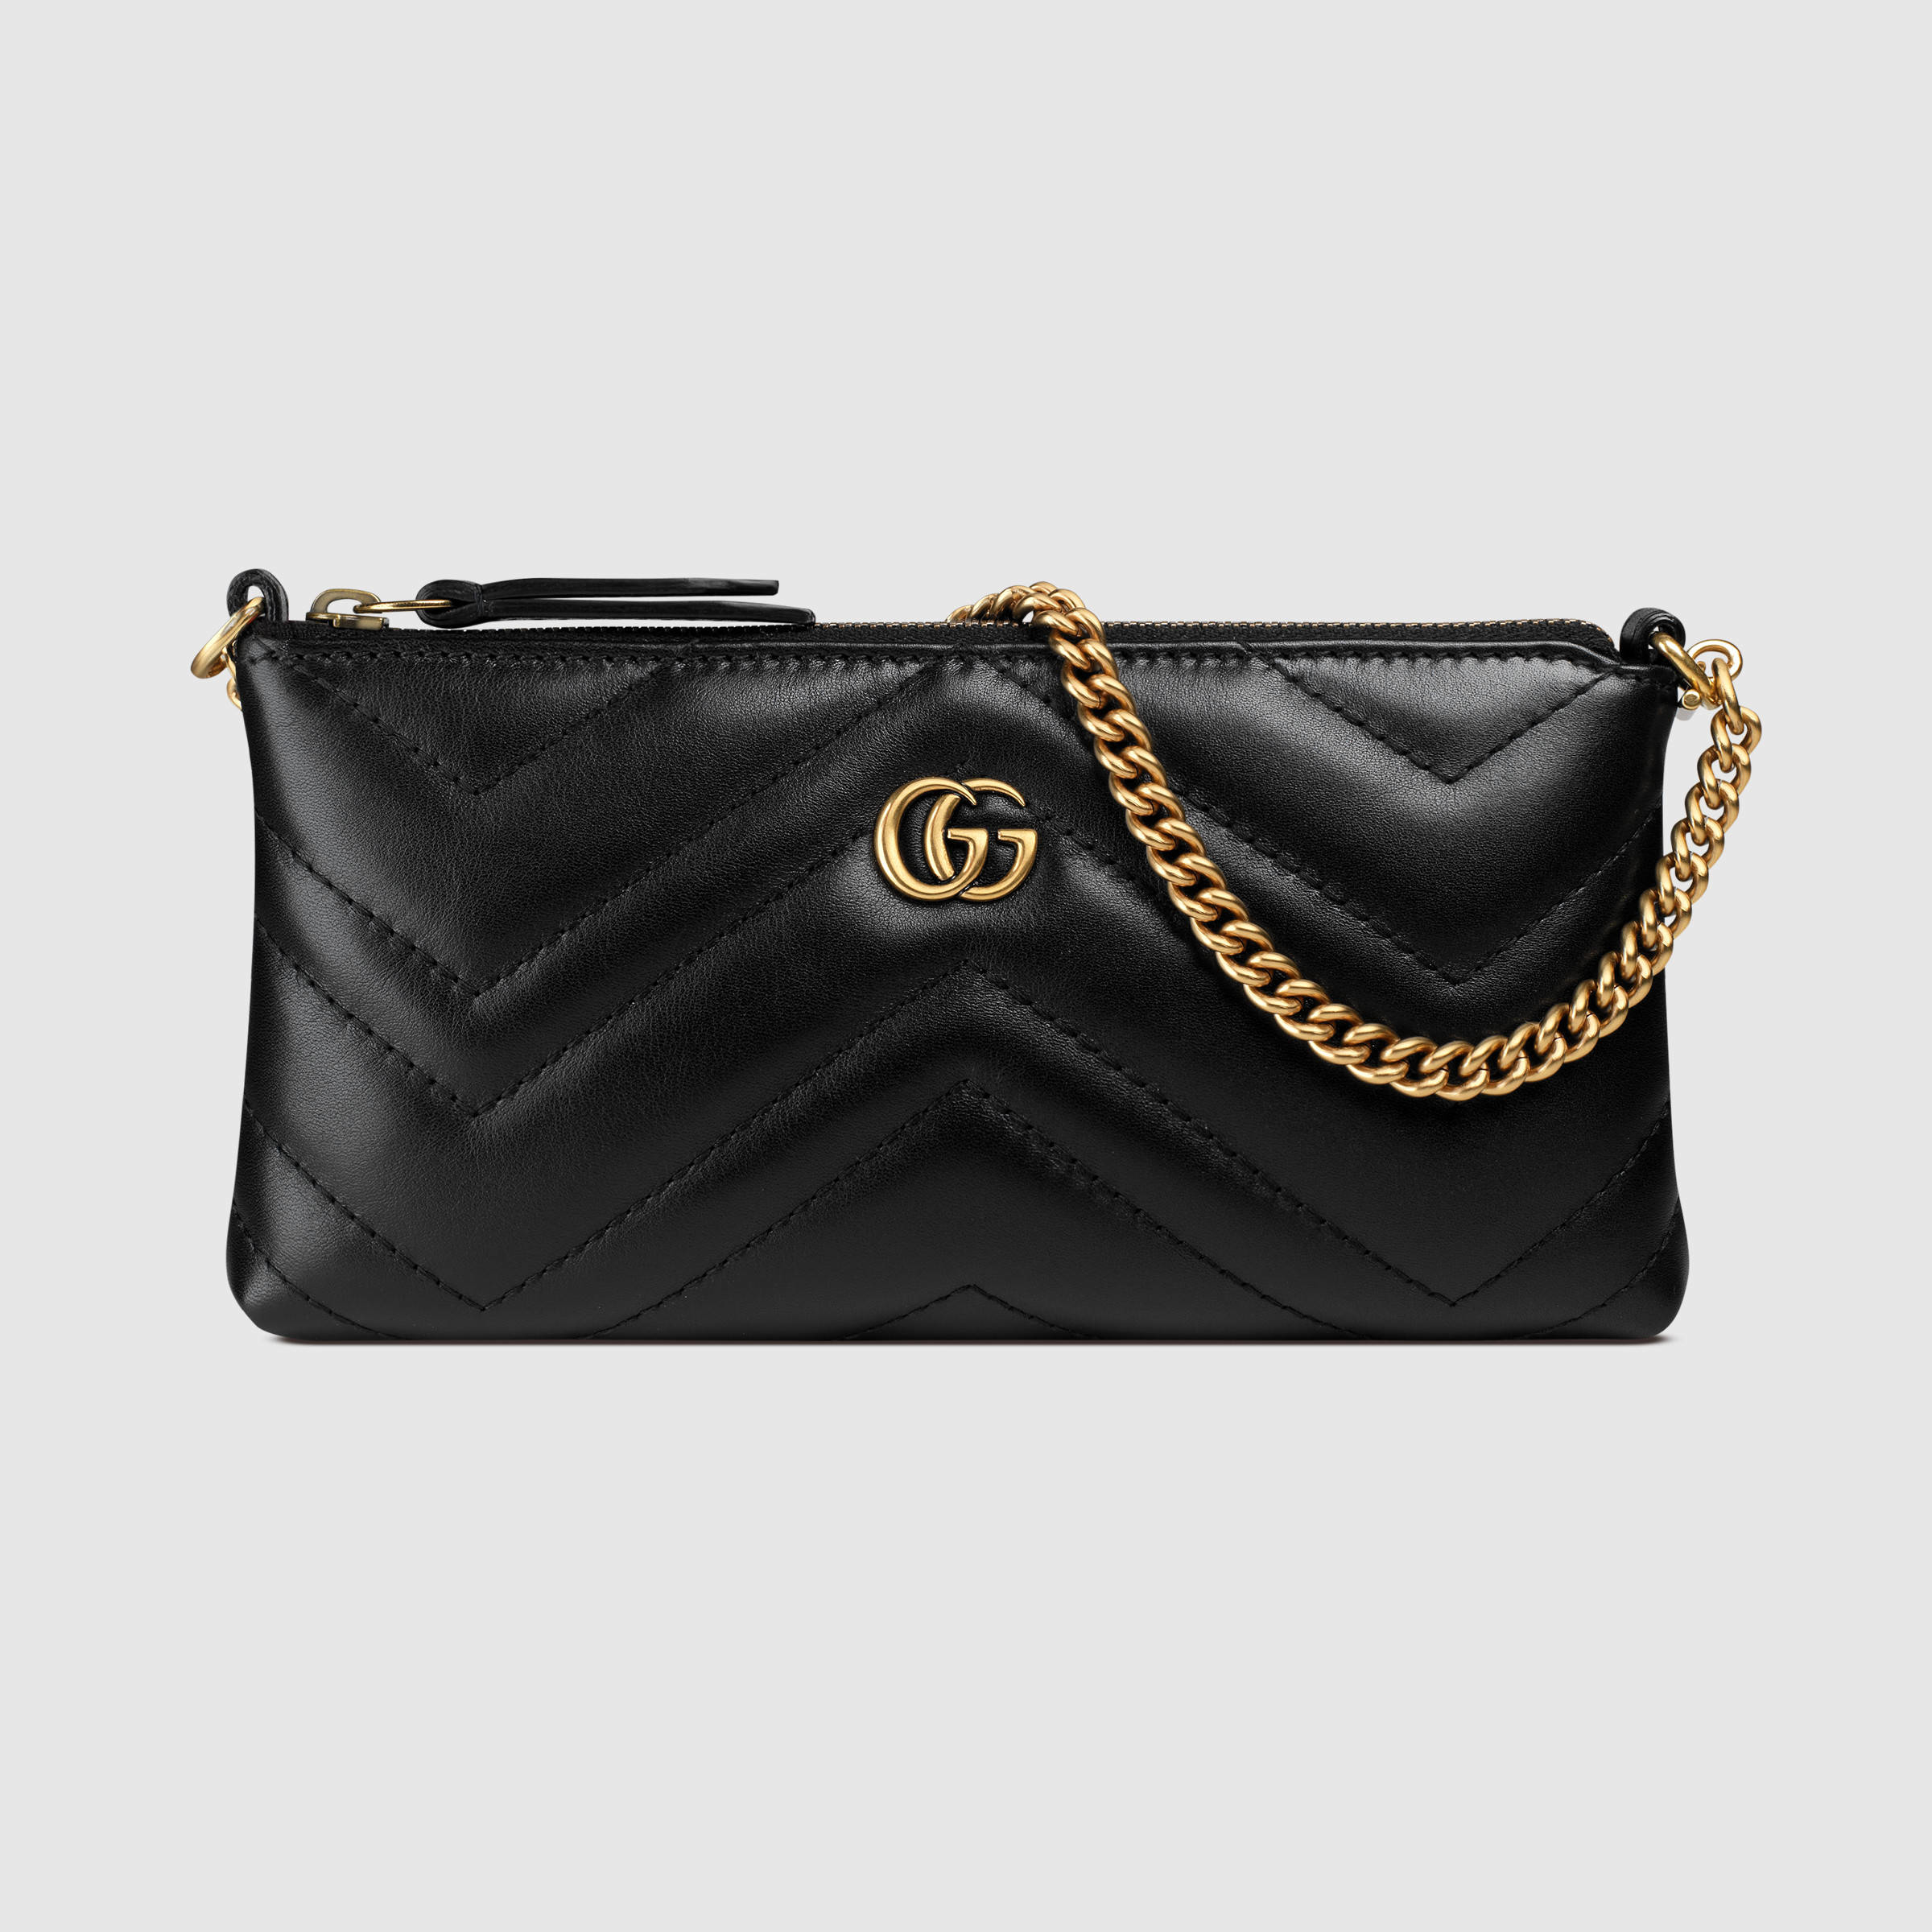 Lyst - Gucci GG Marmont Leather Chain Mini Shoulder Bag in Black